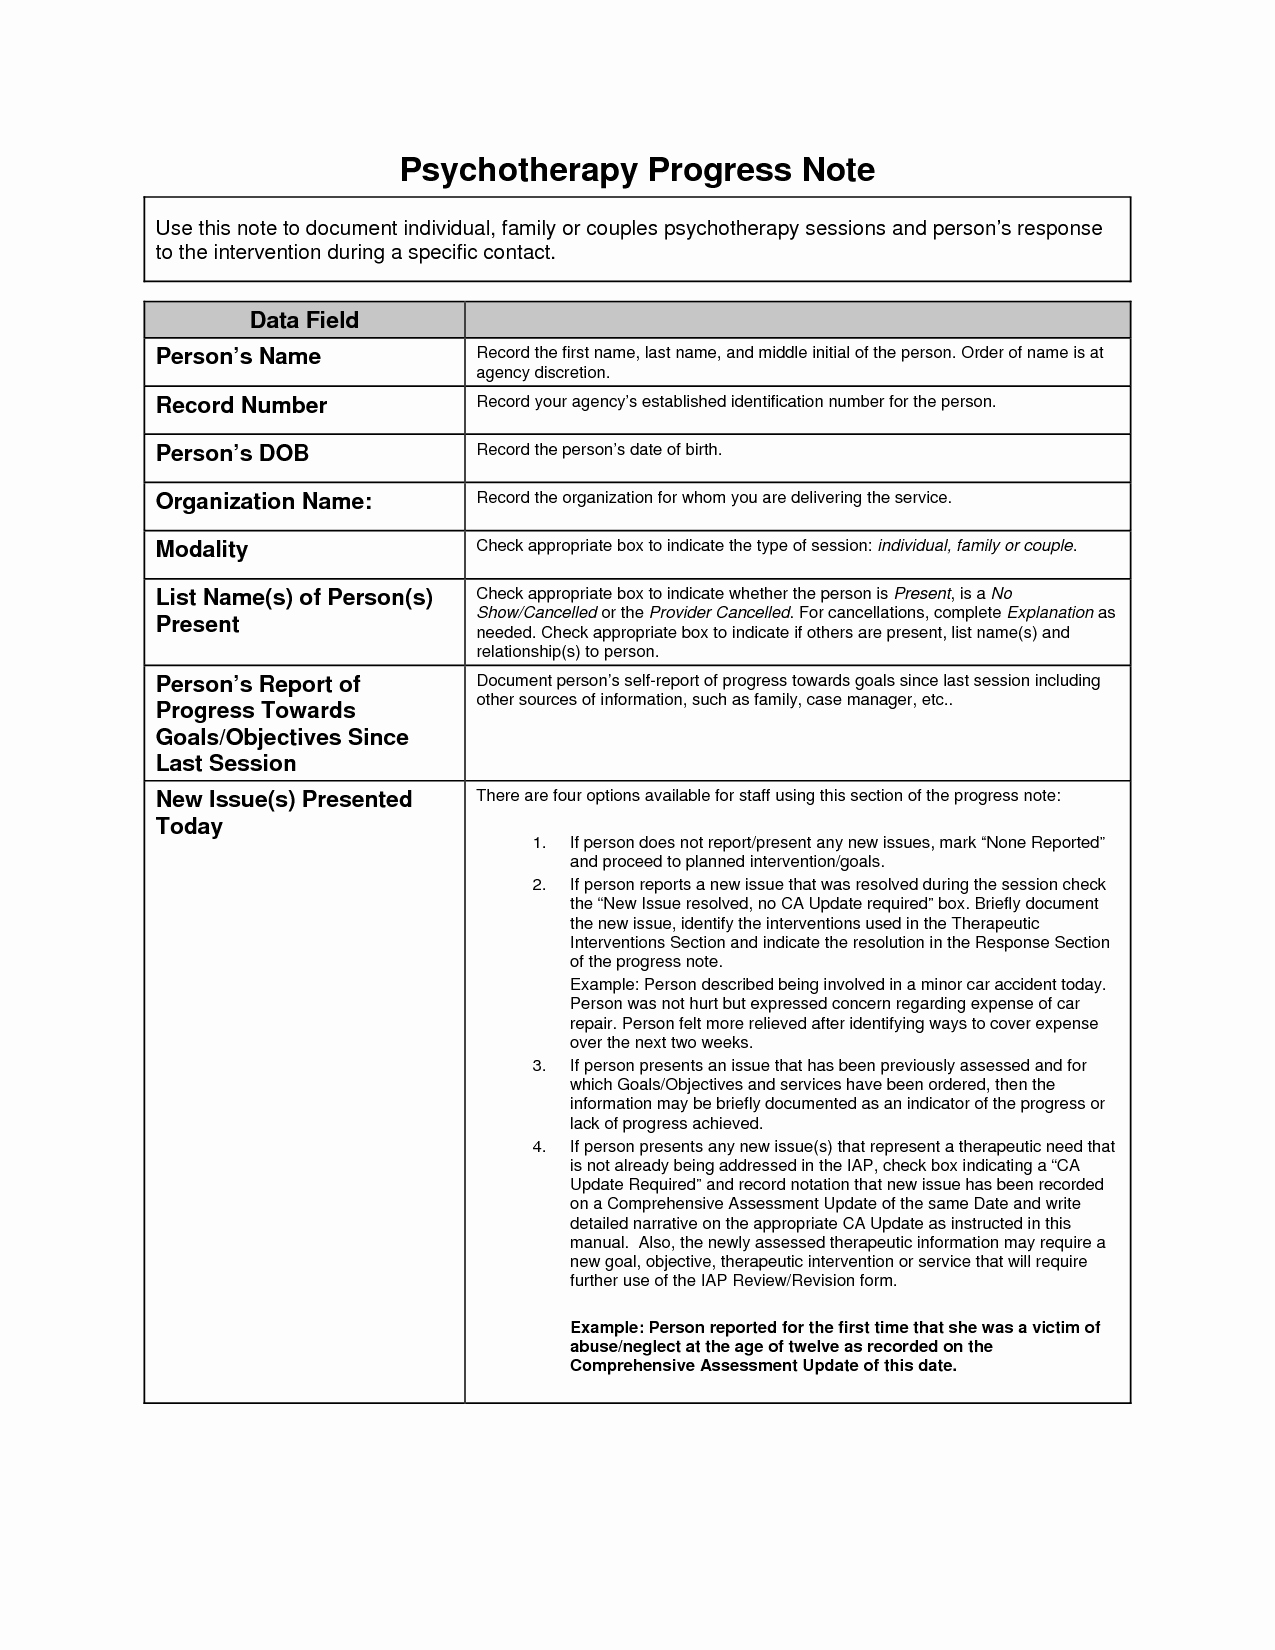 Group therapy Notes Template Elegant Sample Of Psychologist Session Note Google Search